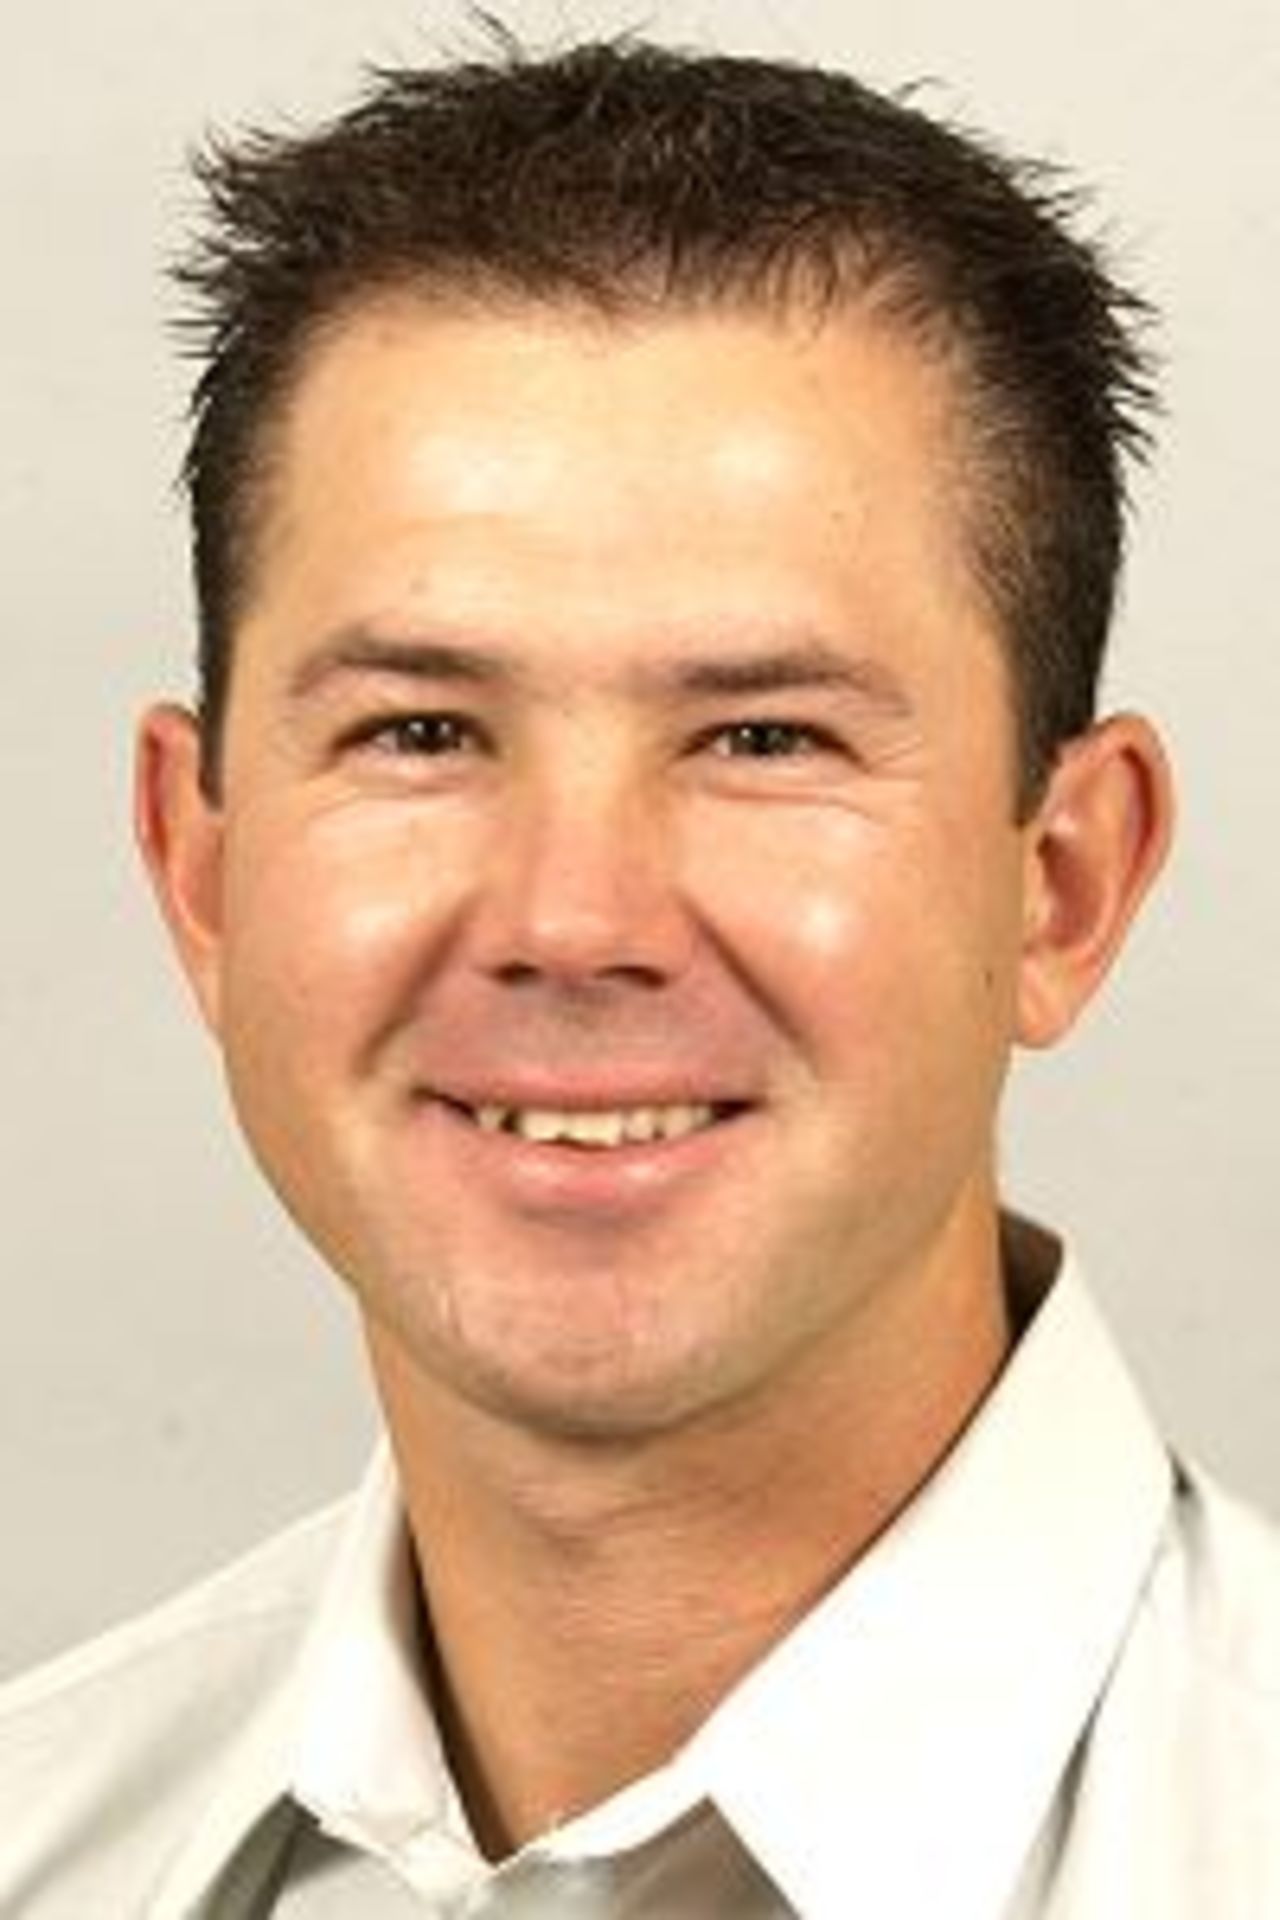 Portrait of Ricky Ponting, October 2001